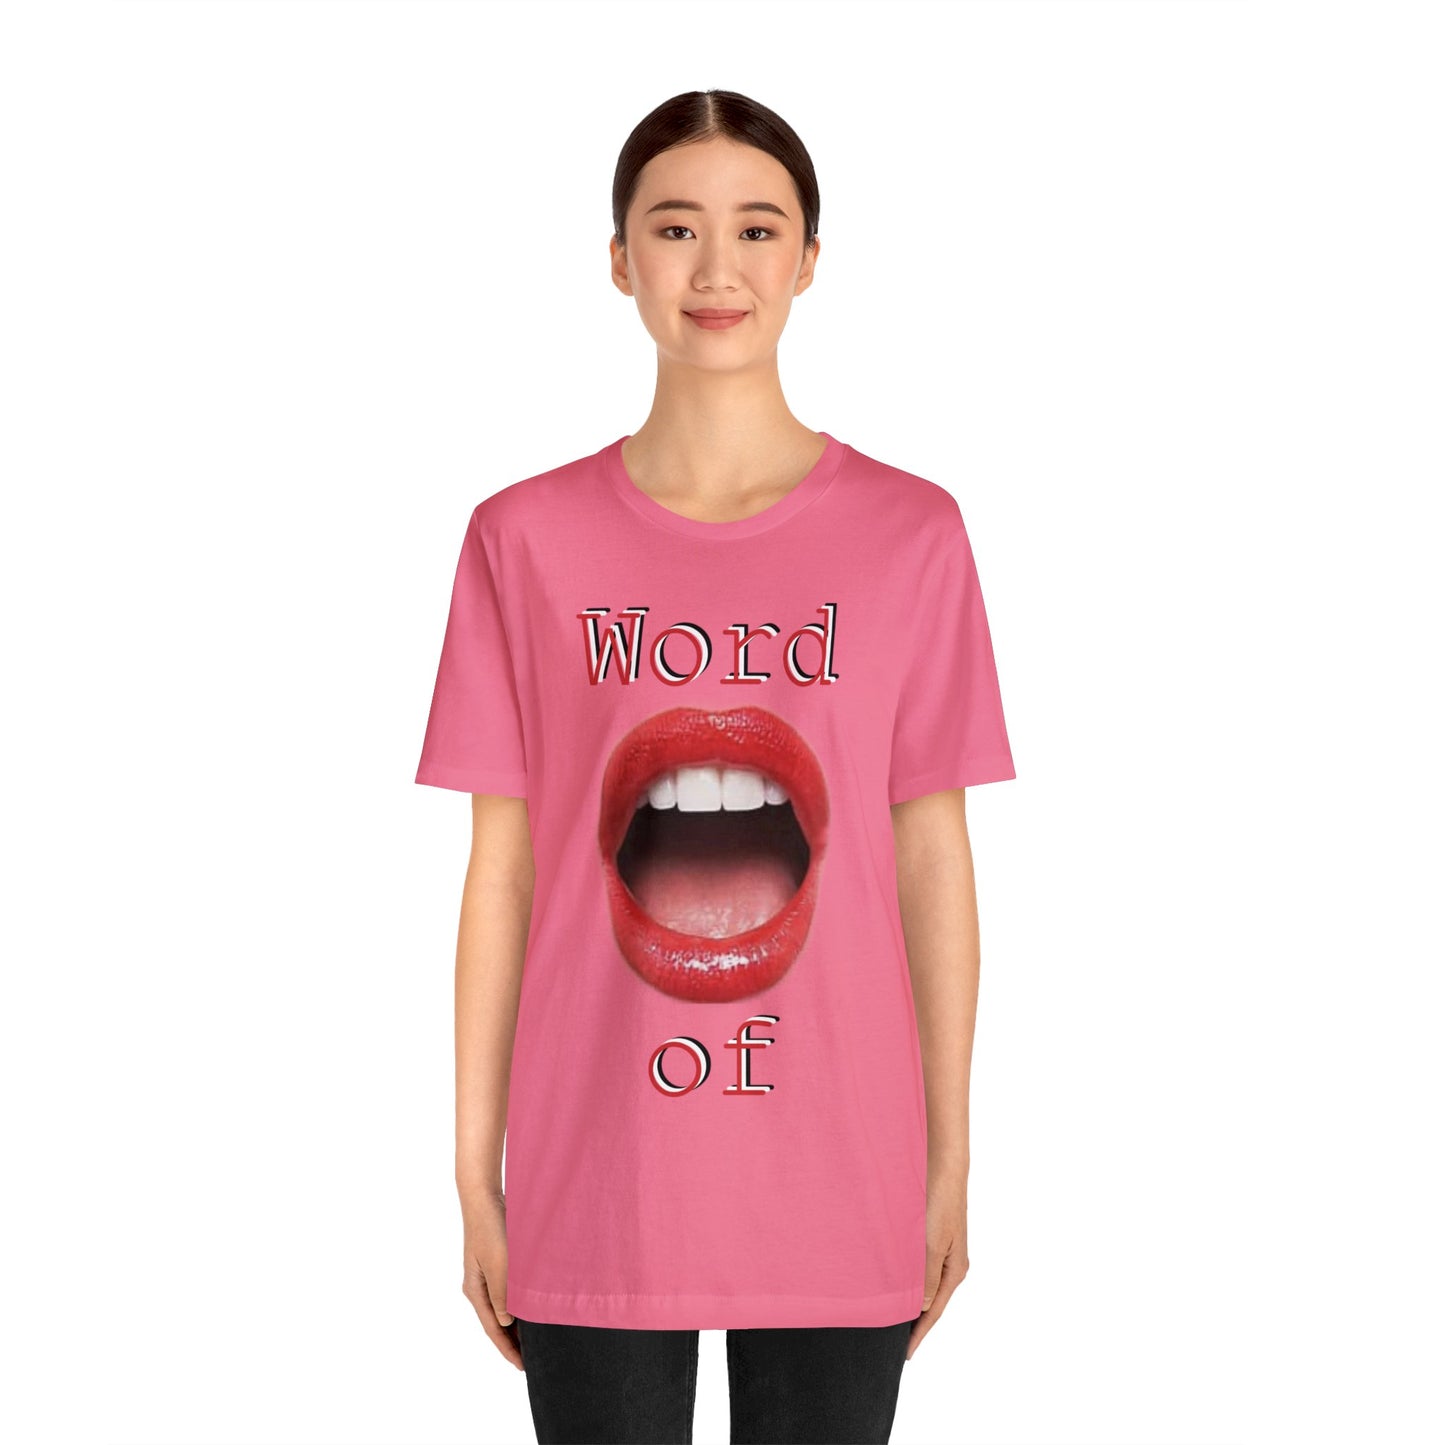 Word Of Mouth - Hurts Shirts Collection